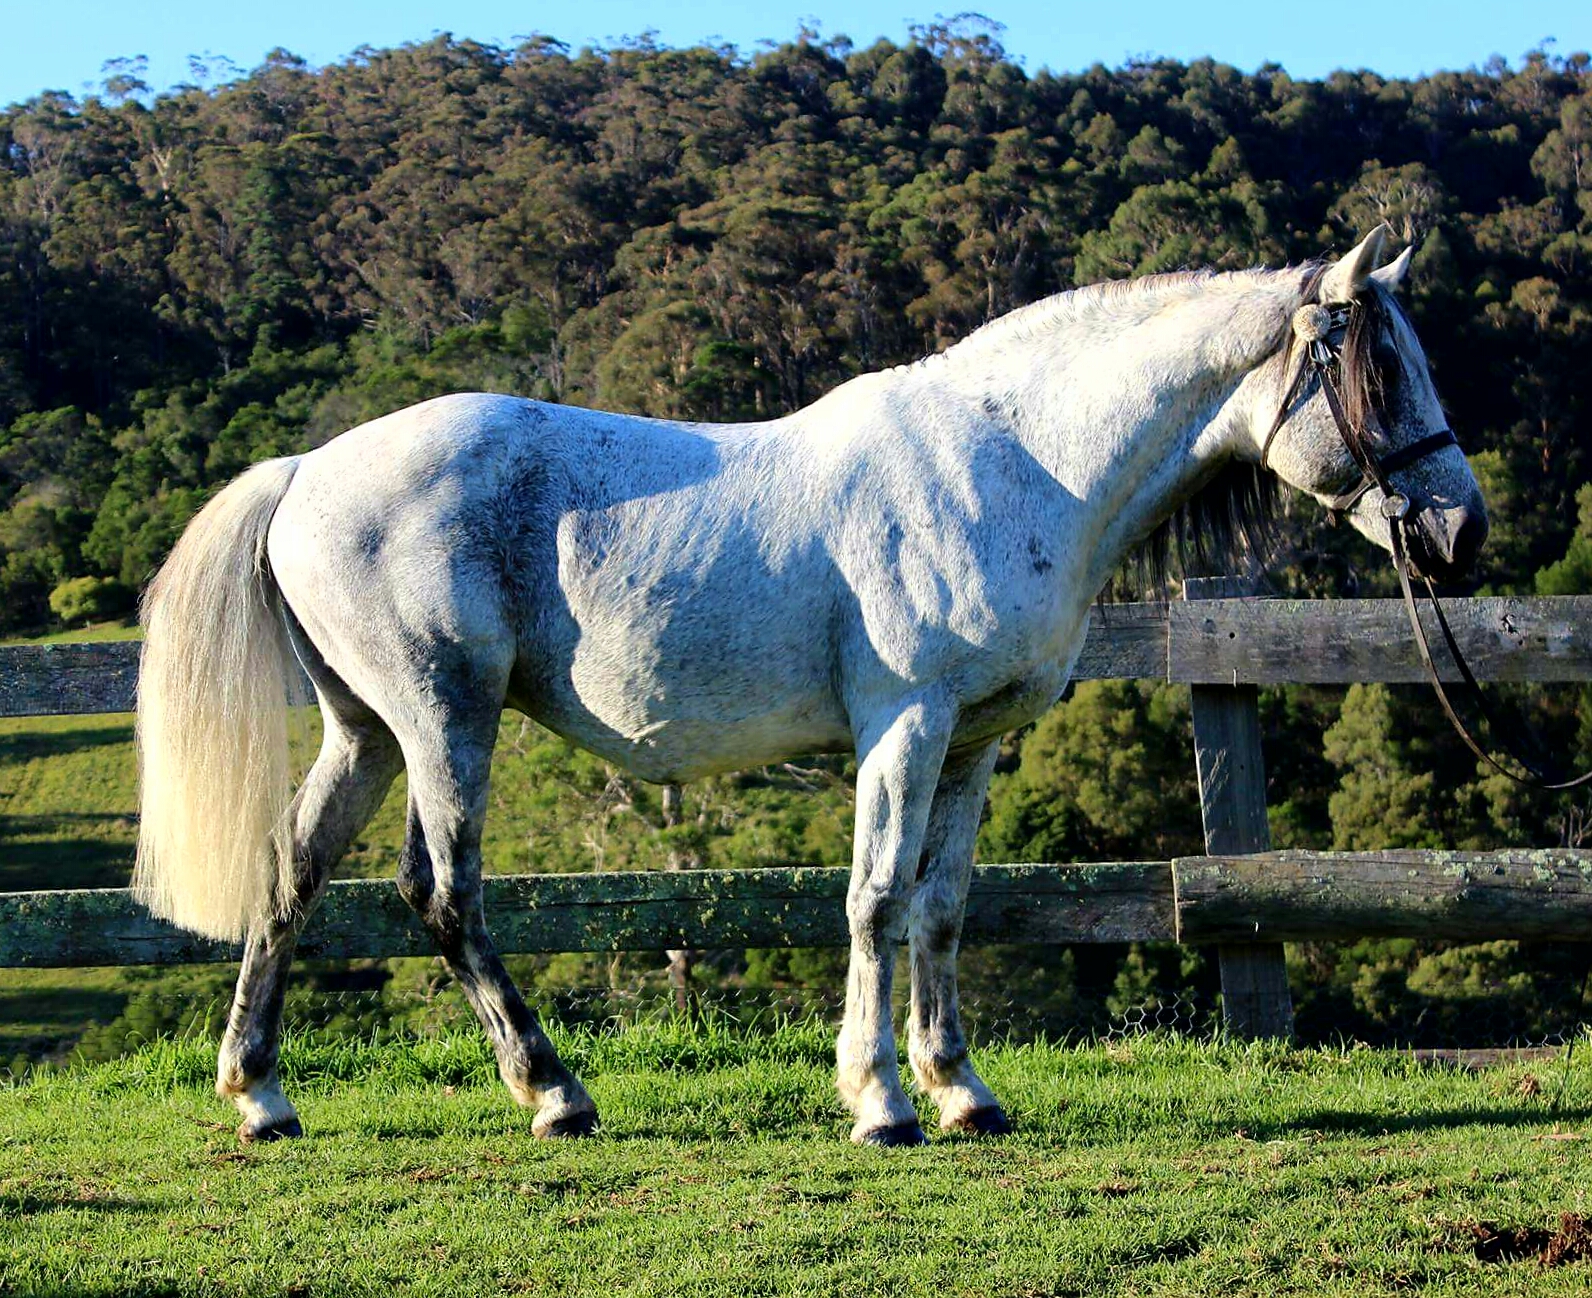  Waler stallion NP Fonzarelli, owned by Forever Walers